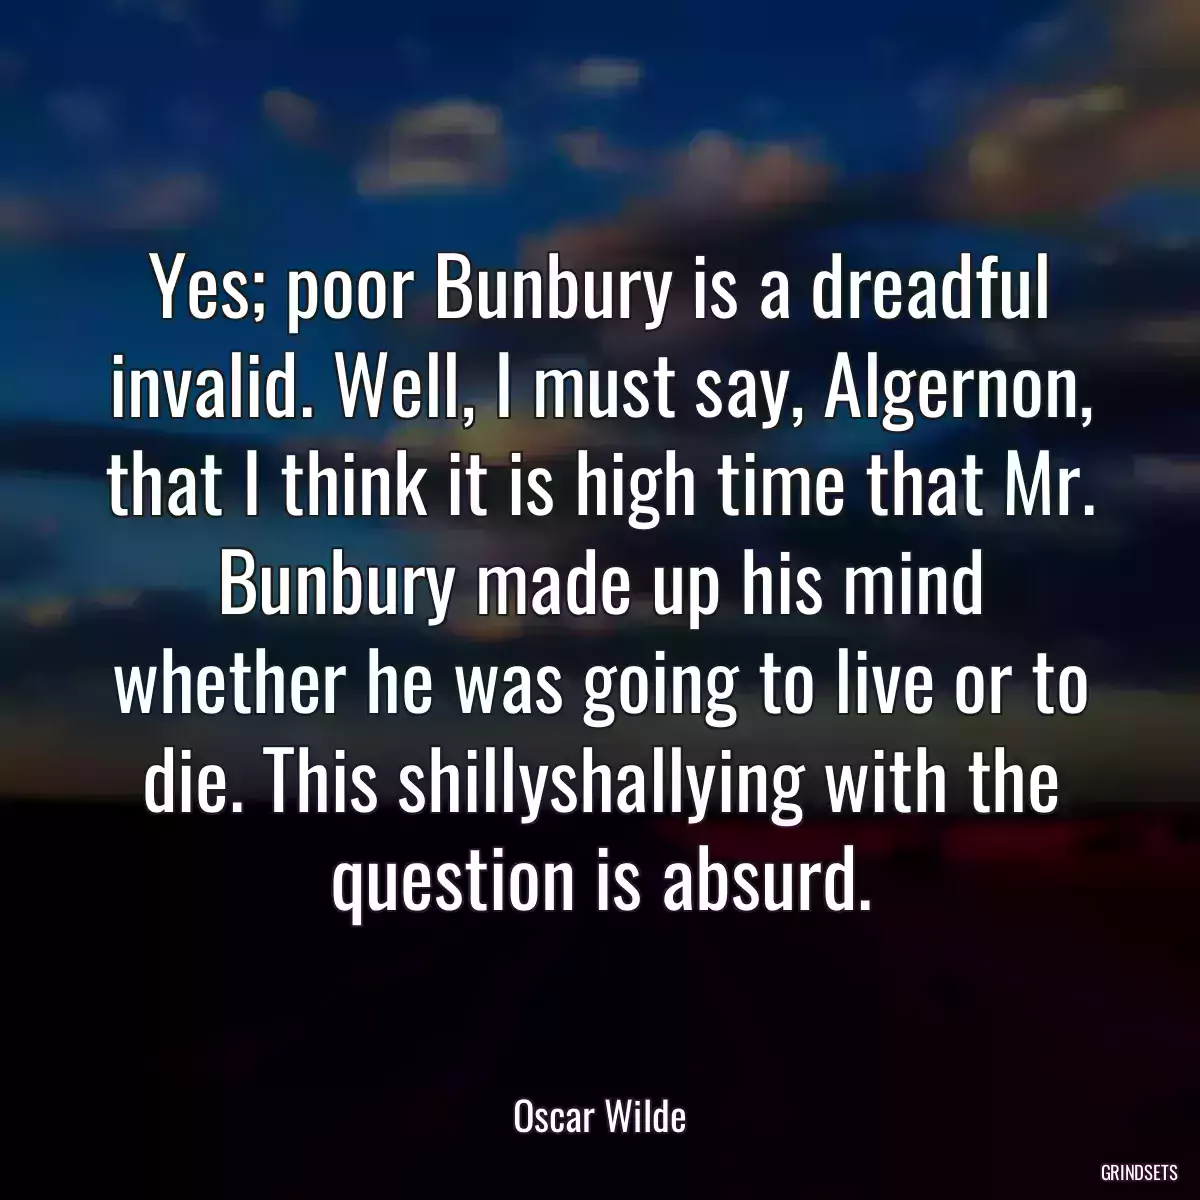 Yes; poor Bunbury is a dreadful invalid. Well, I must say, Algernon, that I think it is high time that Mr. Bunbury made up his mind whether he was going to live or to die. This shillyshallying with the question is absurd.